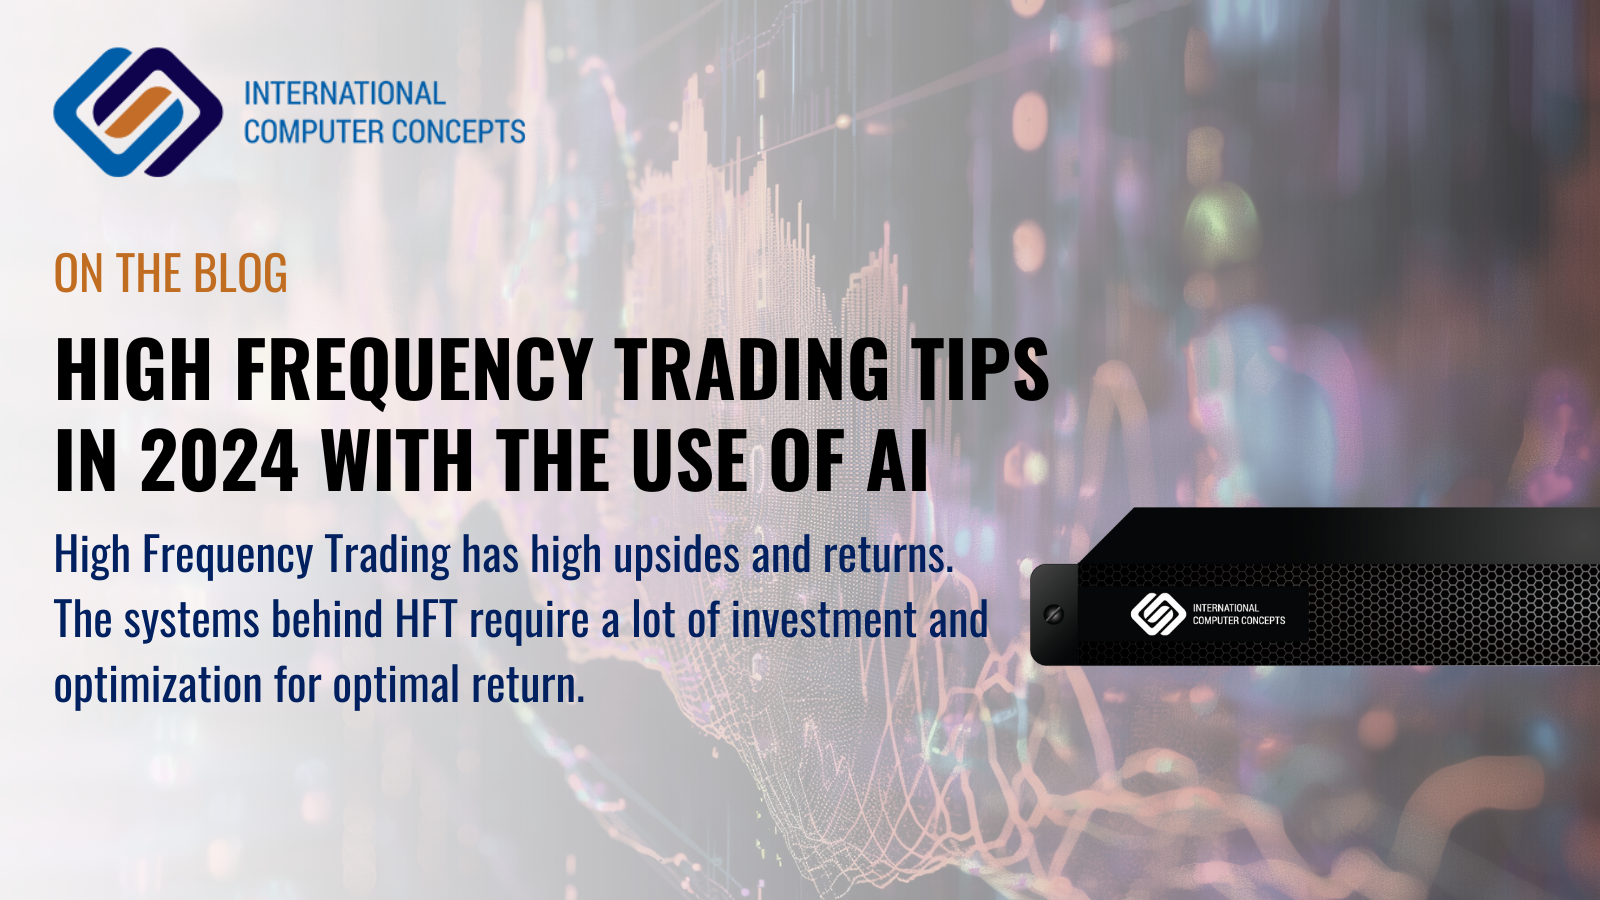 High-frequency trading tips in 2024 with the use of AI